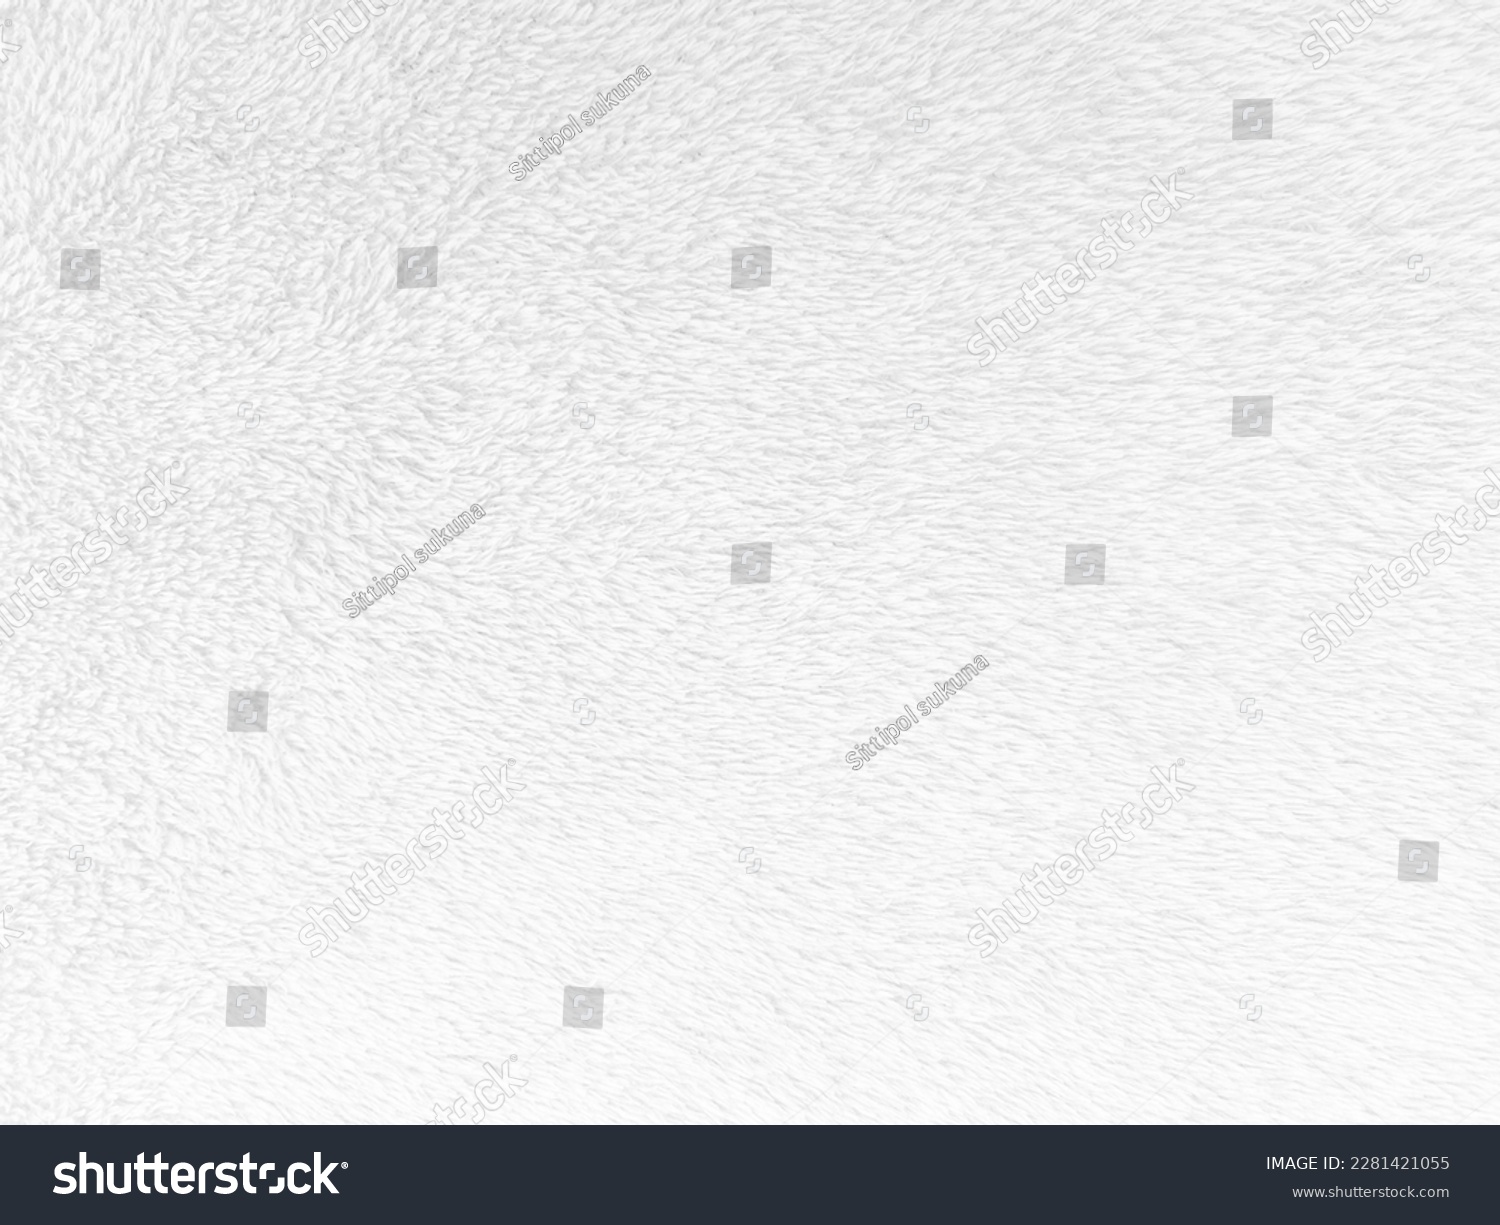 White clean wool texture background. light natural sheep wool. white seamless cotton. texture of fluffy fur for designers. close-up fragment white wool carpet.	 #2281421055